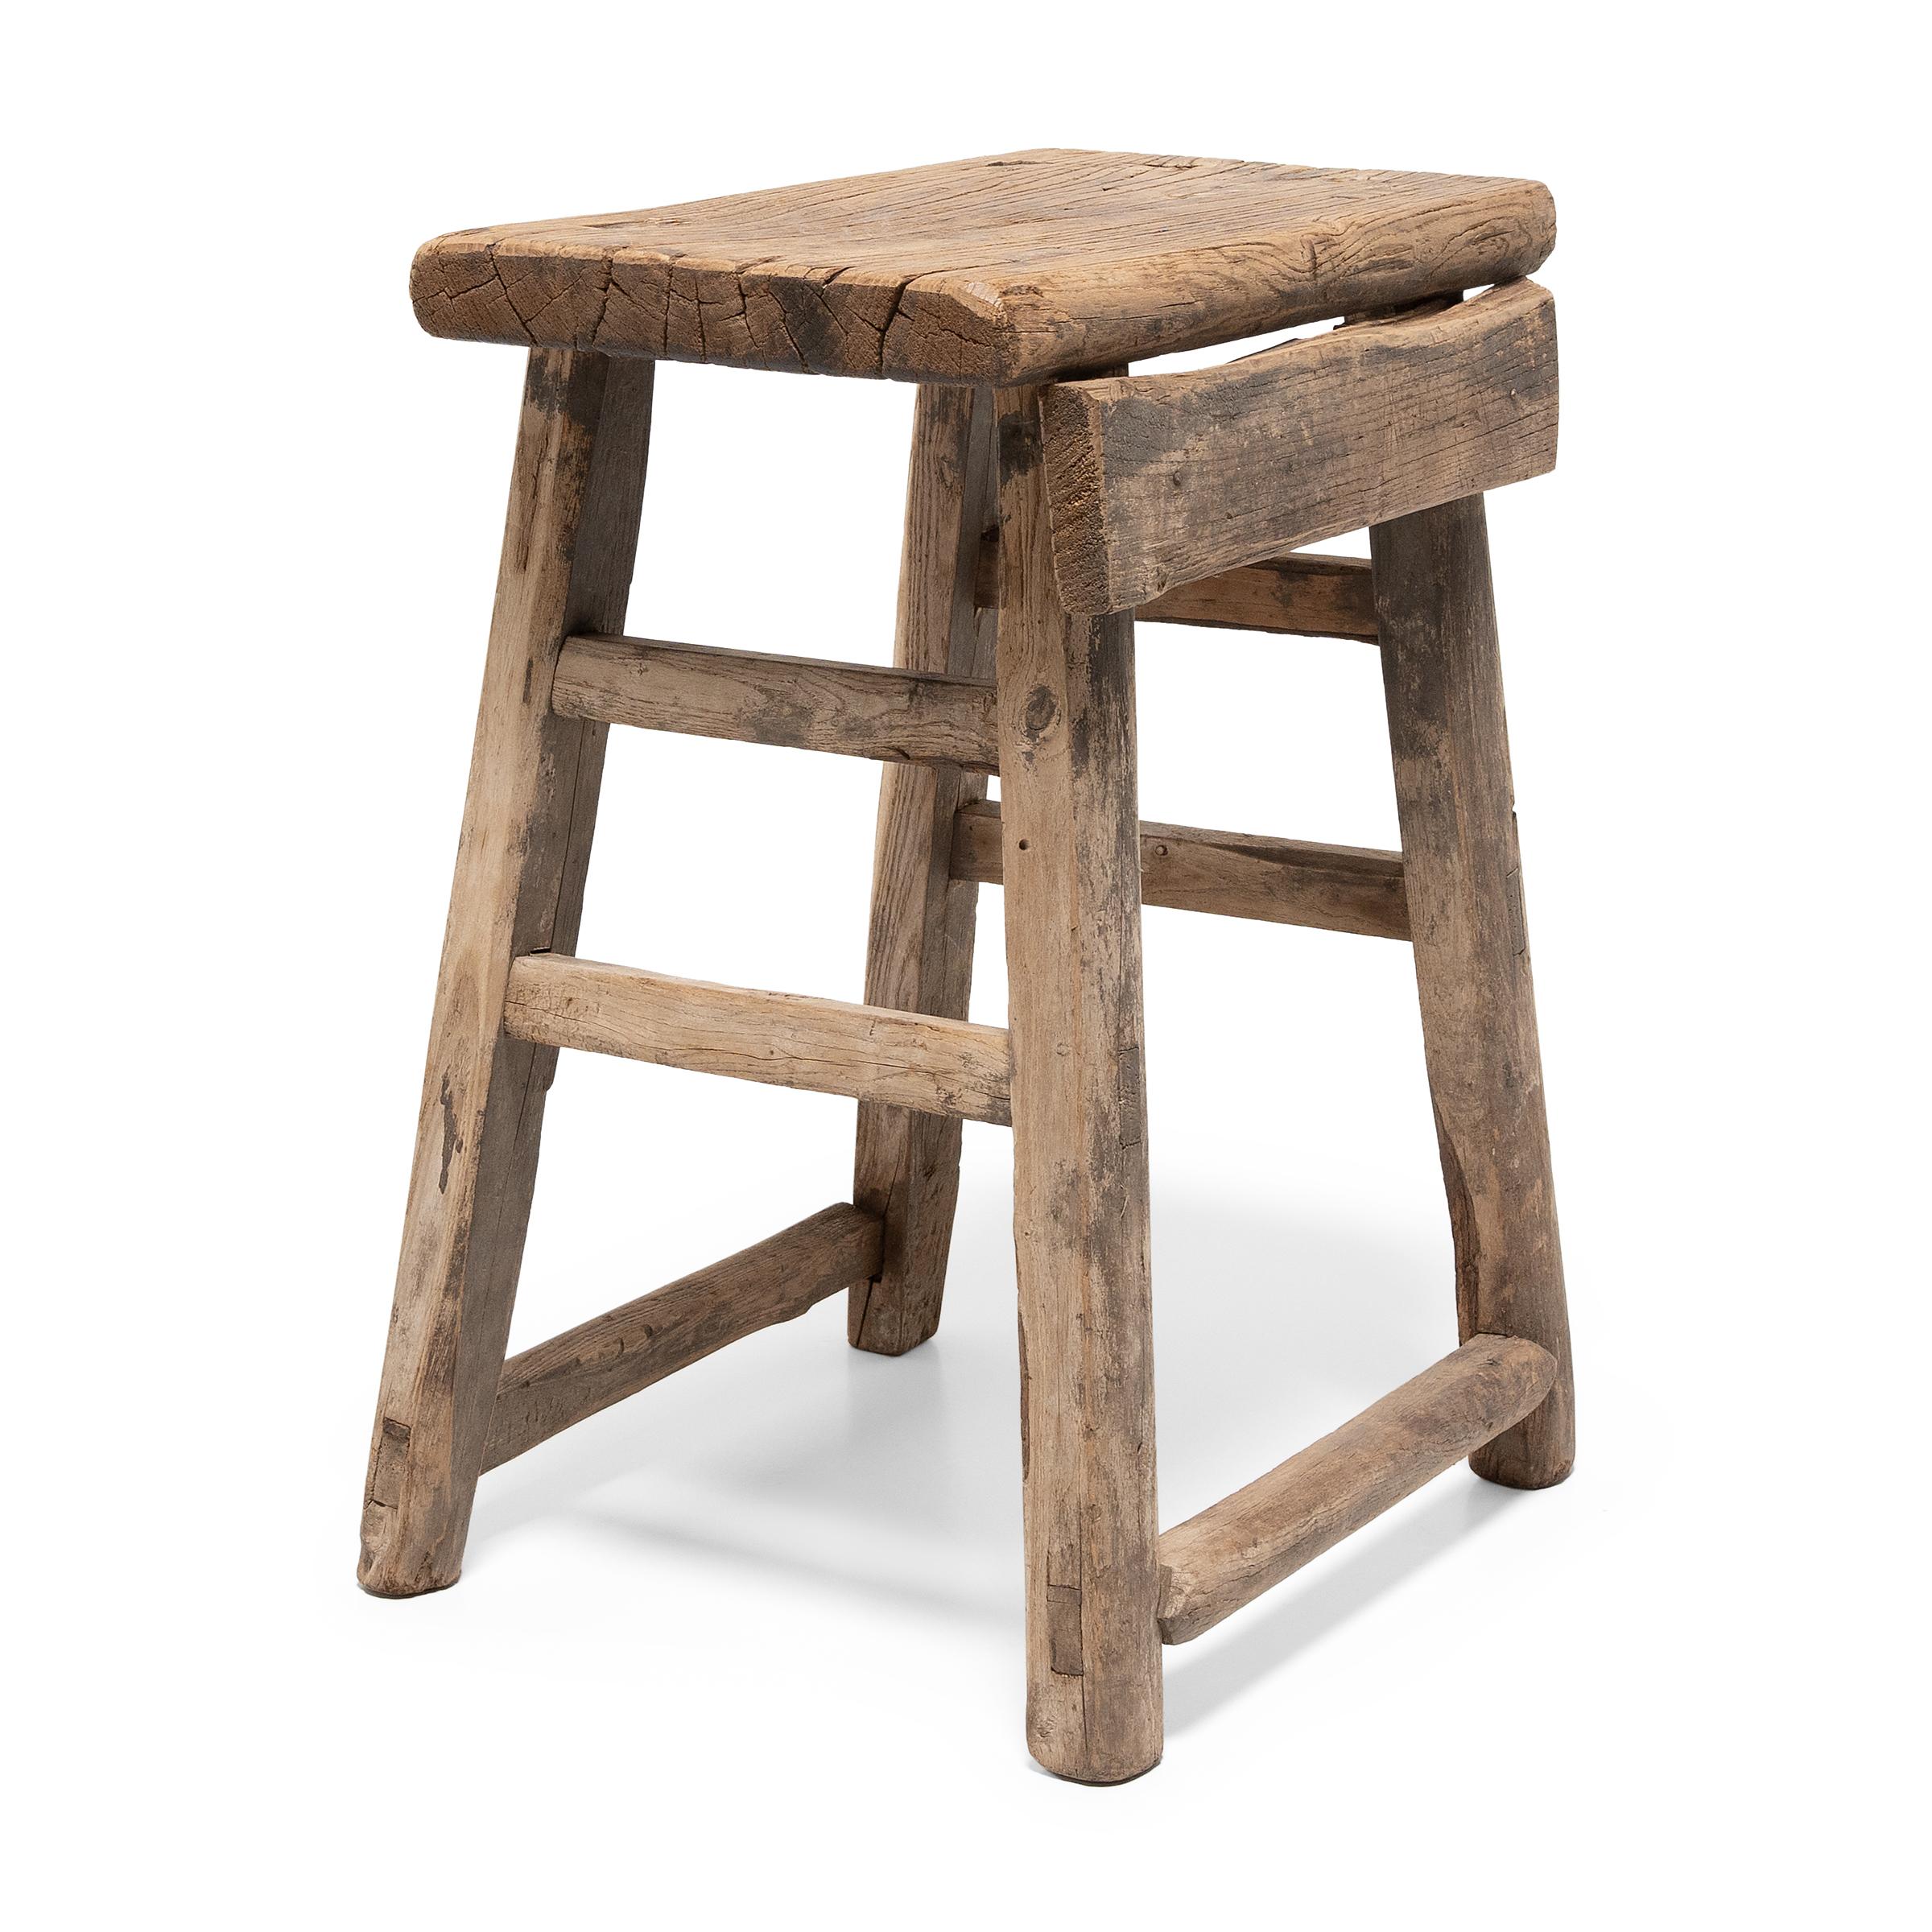 Rustic Provincial Chinese Courtyard Stool, c. 1900 For Sale